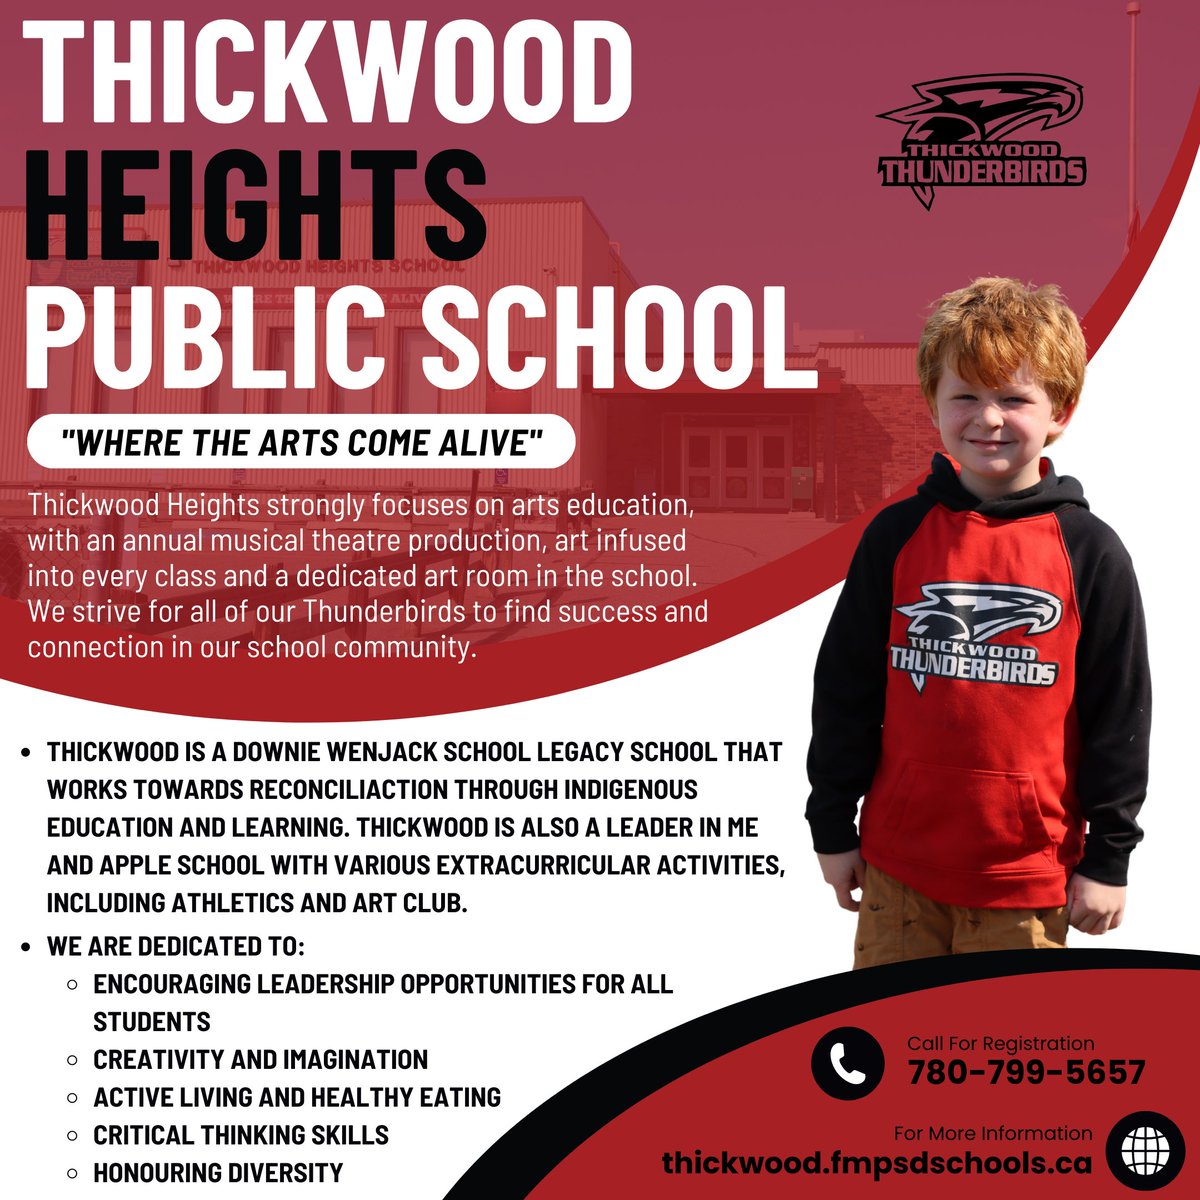 At @thickwoodArts, there is a strong focus on arts education, with an annual musical theatre production, art infused into every class and a dedicated art room in the school. For more info: thickwood.fmpsdschools.ca Register now: bit.ly/3B6Pj6F @annaleeskinner #FMPSD #YMM